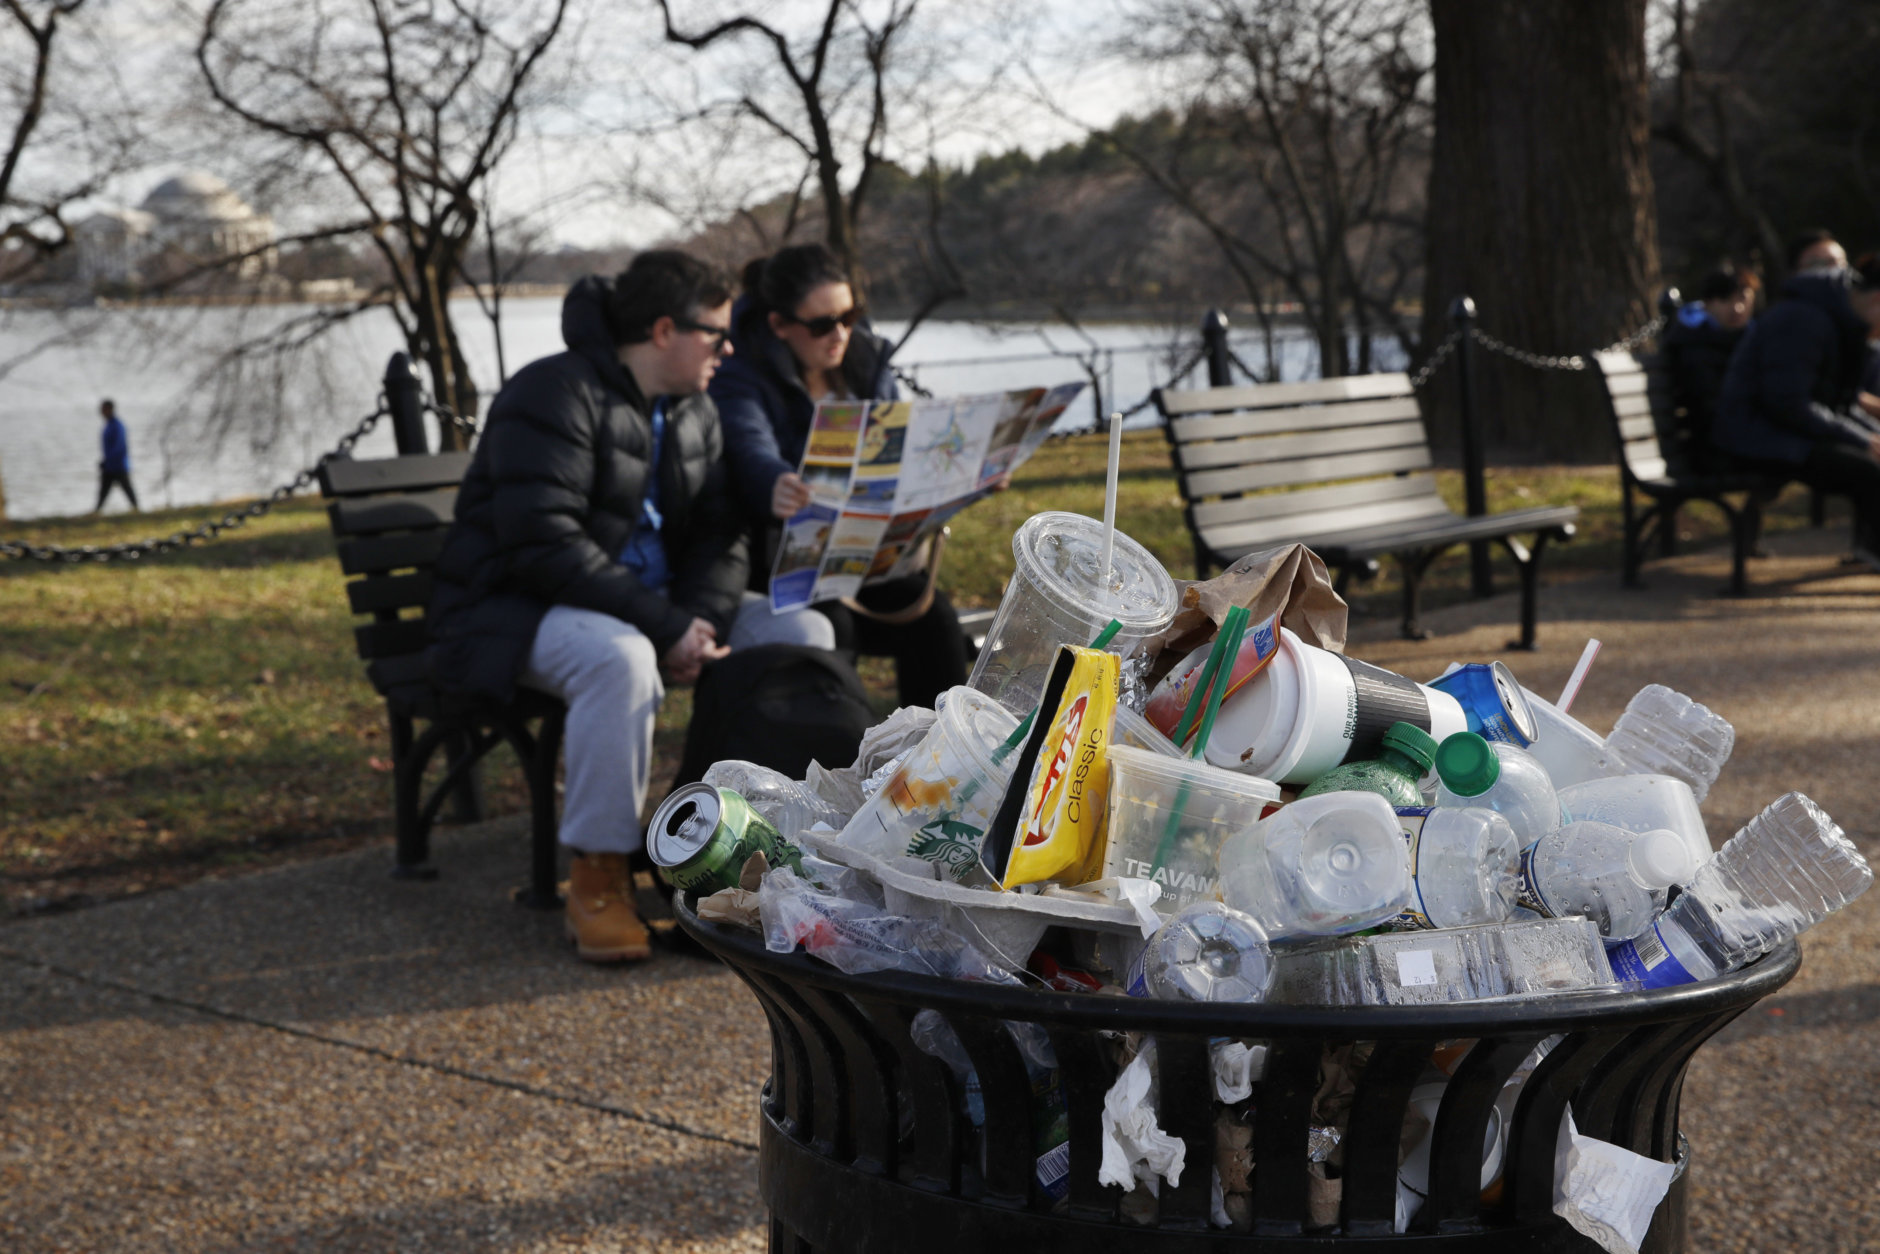 A trash can overflows as people site outside of the Martin Luther King Jr. Memorial by the Tidal Basin, Thursday, Dec. 27, 2018, in Washington, during a partial government shutdown. Chances look slim for ending the partial government shutdown any time soon. Lawmakers are away from Washington for the holidays and have been told they will get 24 hours' notice before having to return for a vote. Washington area national parks will remain open during the partial government shutdown, but without visitor center services. (AP Photo/Jacquelyn Martin)